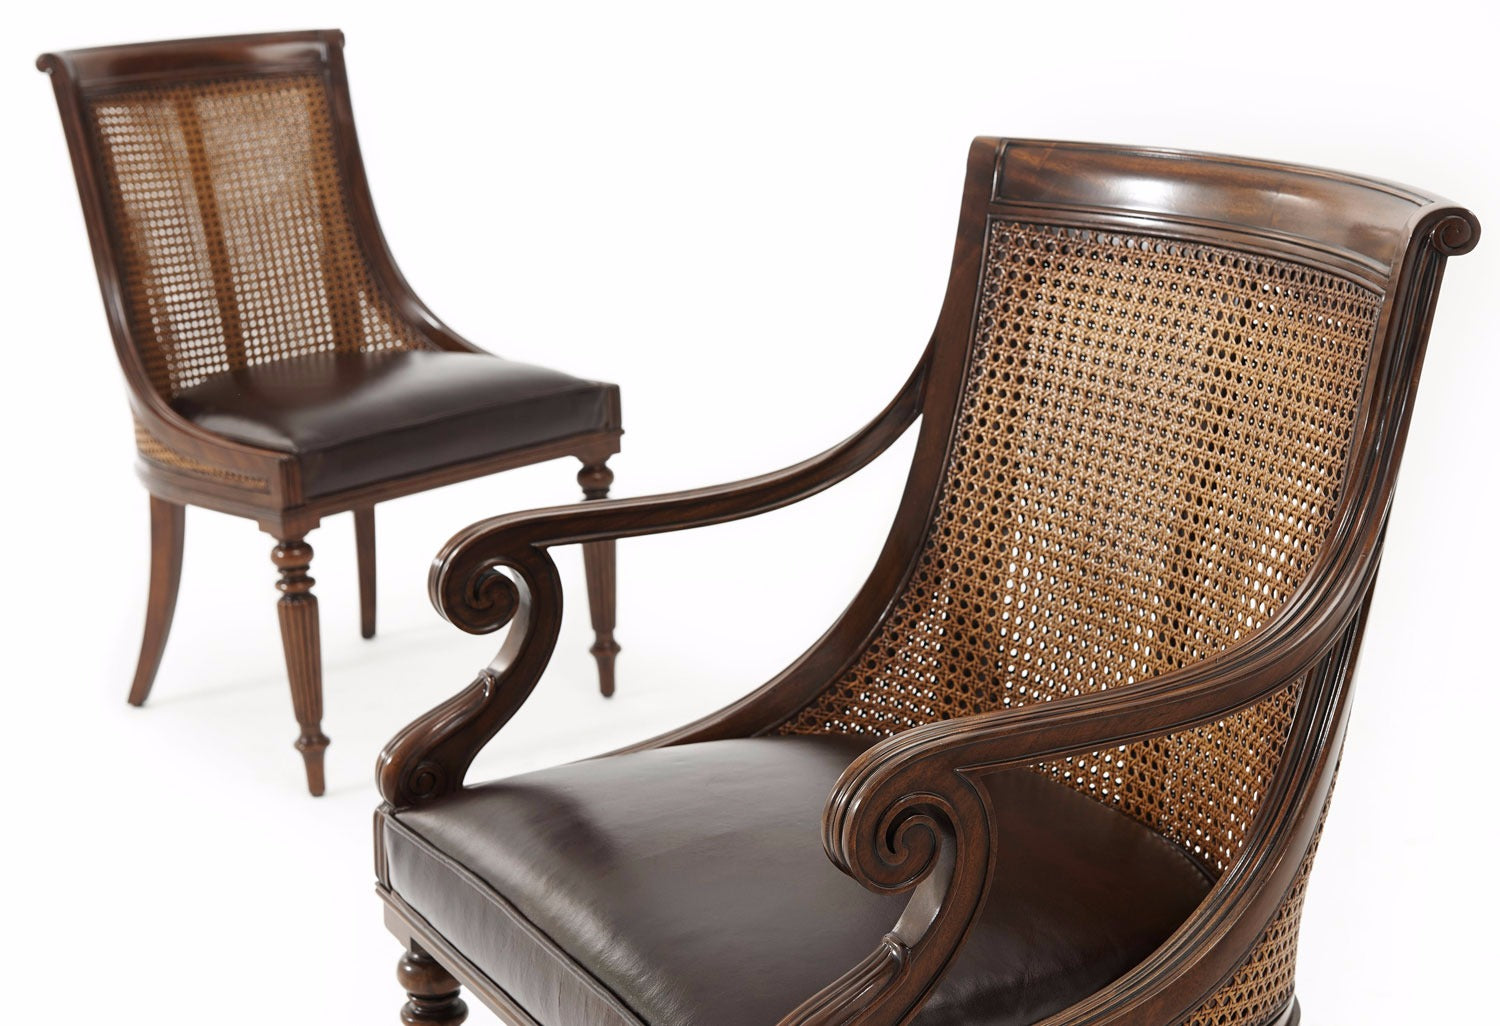 Hand carved mahogany scoop back dining chair